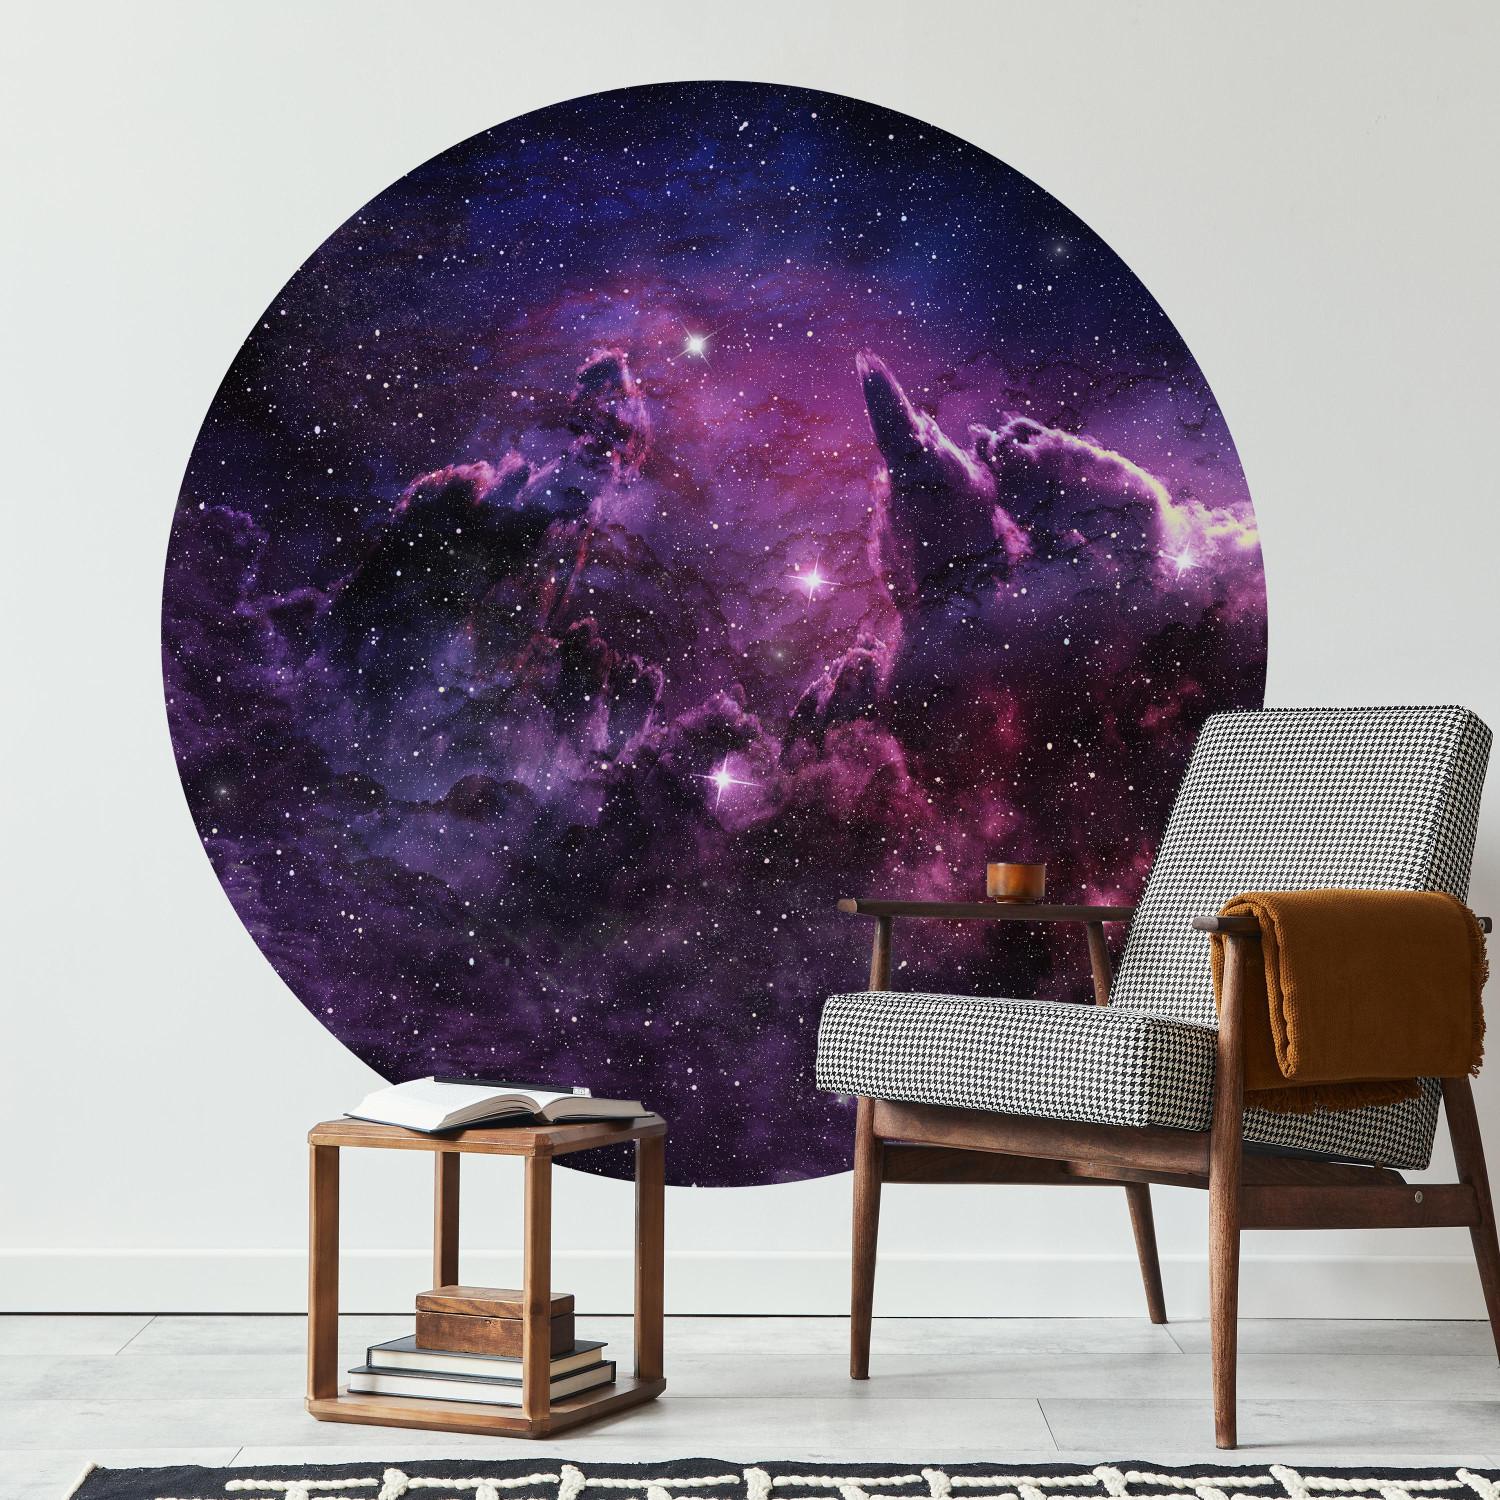 Fotomurales redondos Starry Sky - The Night Sky in Shades of Purple and Navy Blue